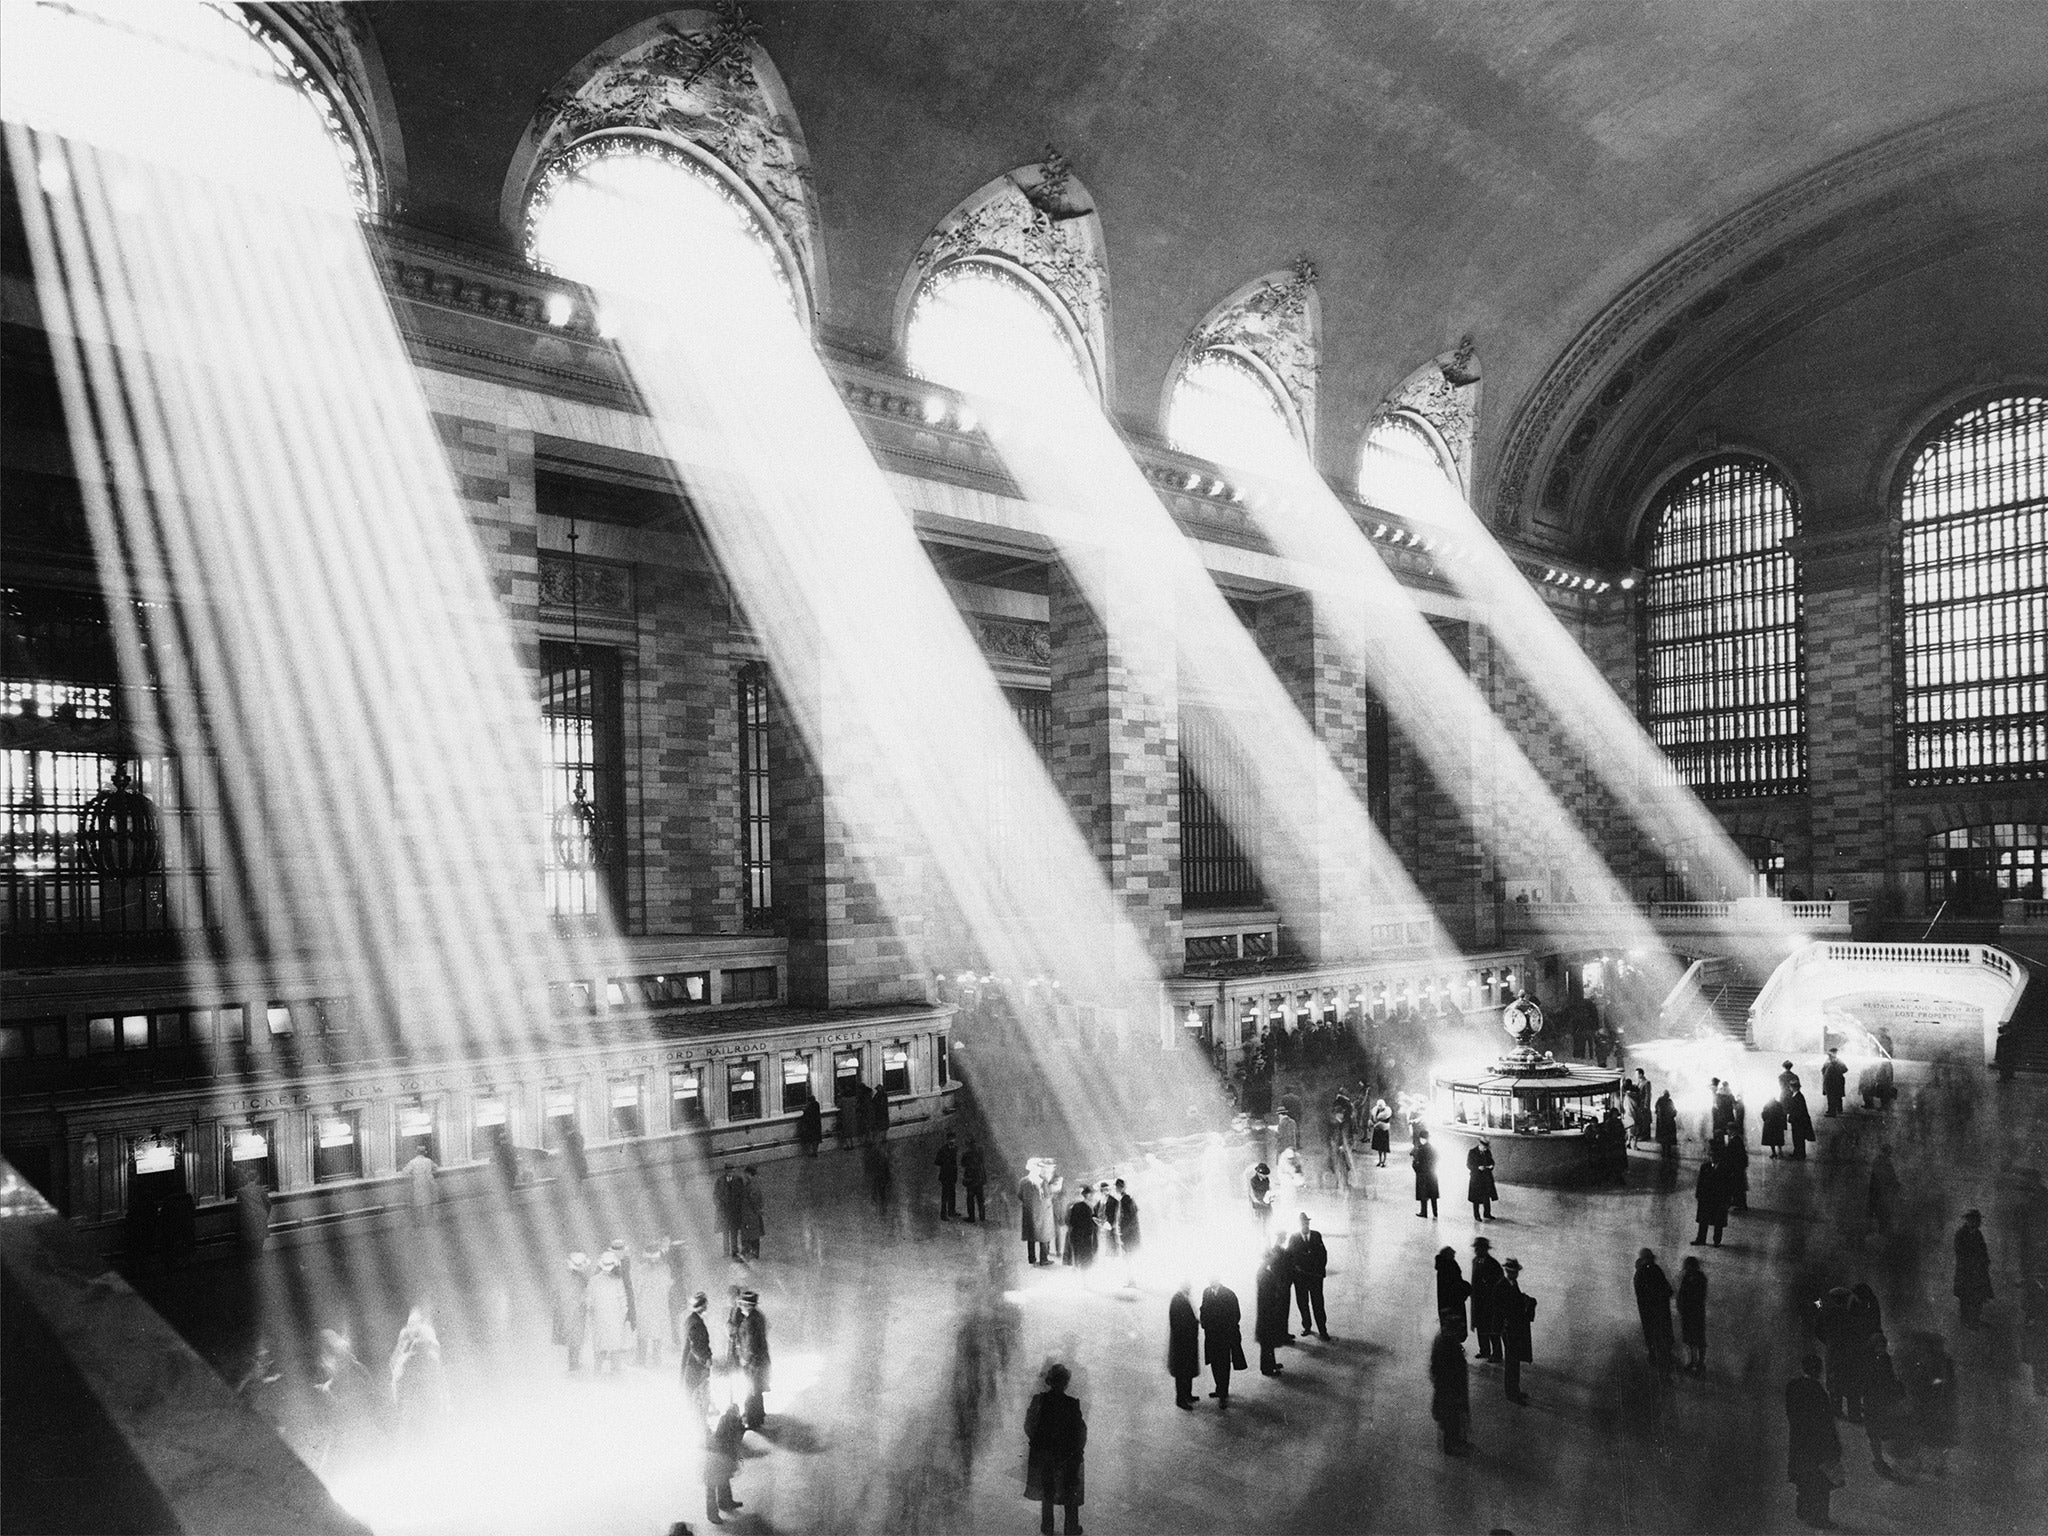 All aboard: while her story was as contemporary as 1940s passengers in Grand Central, Smart’s allusions were Biblical and classical